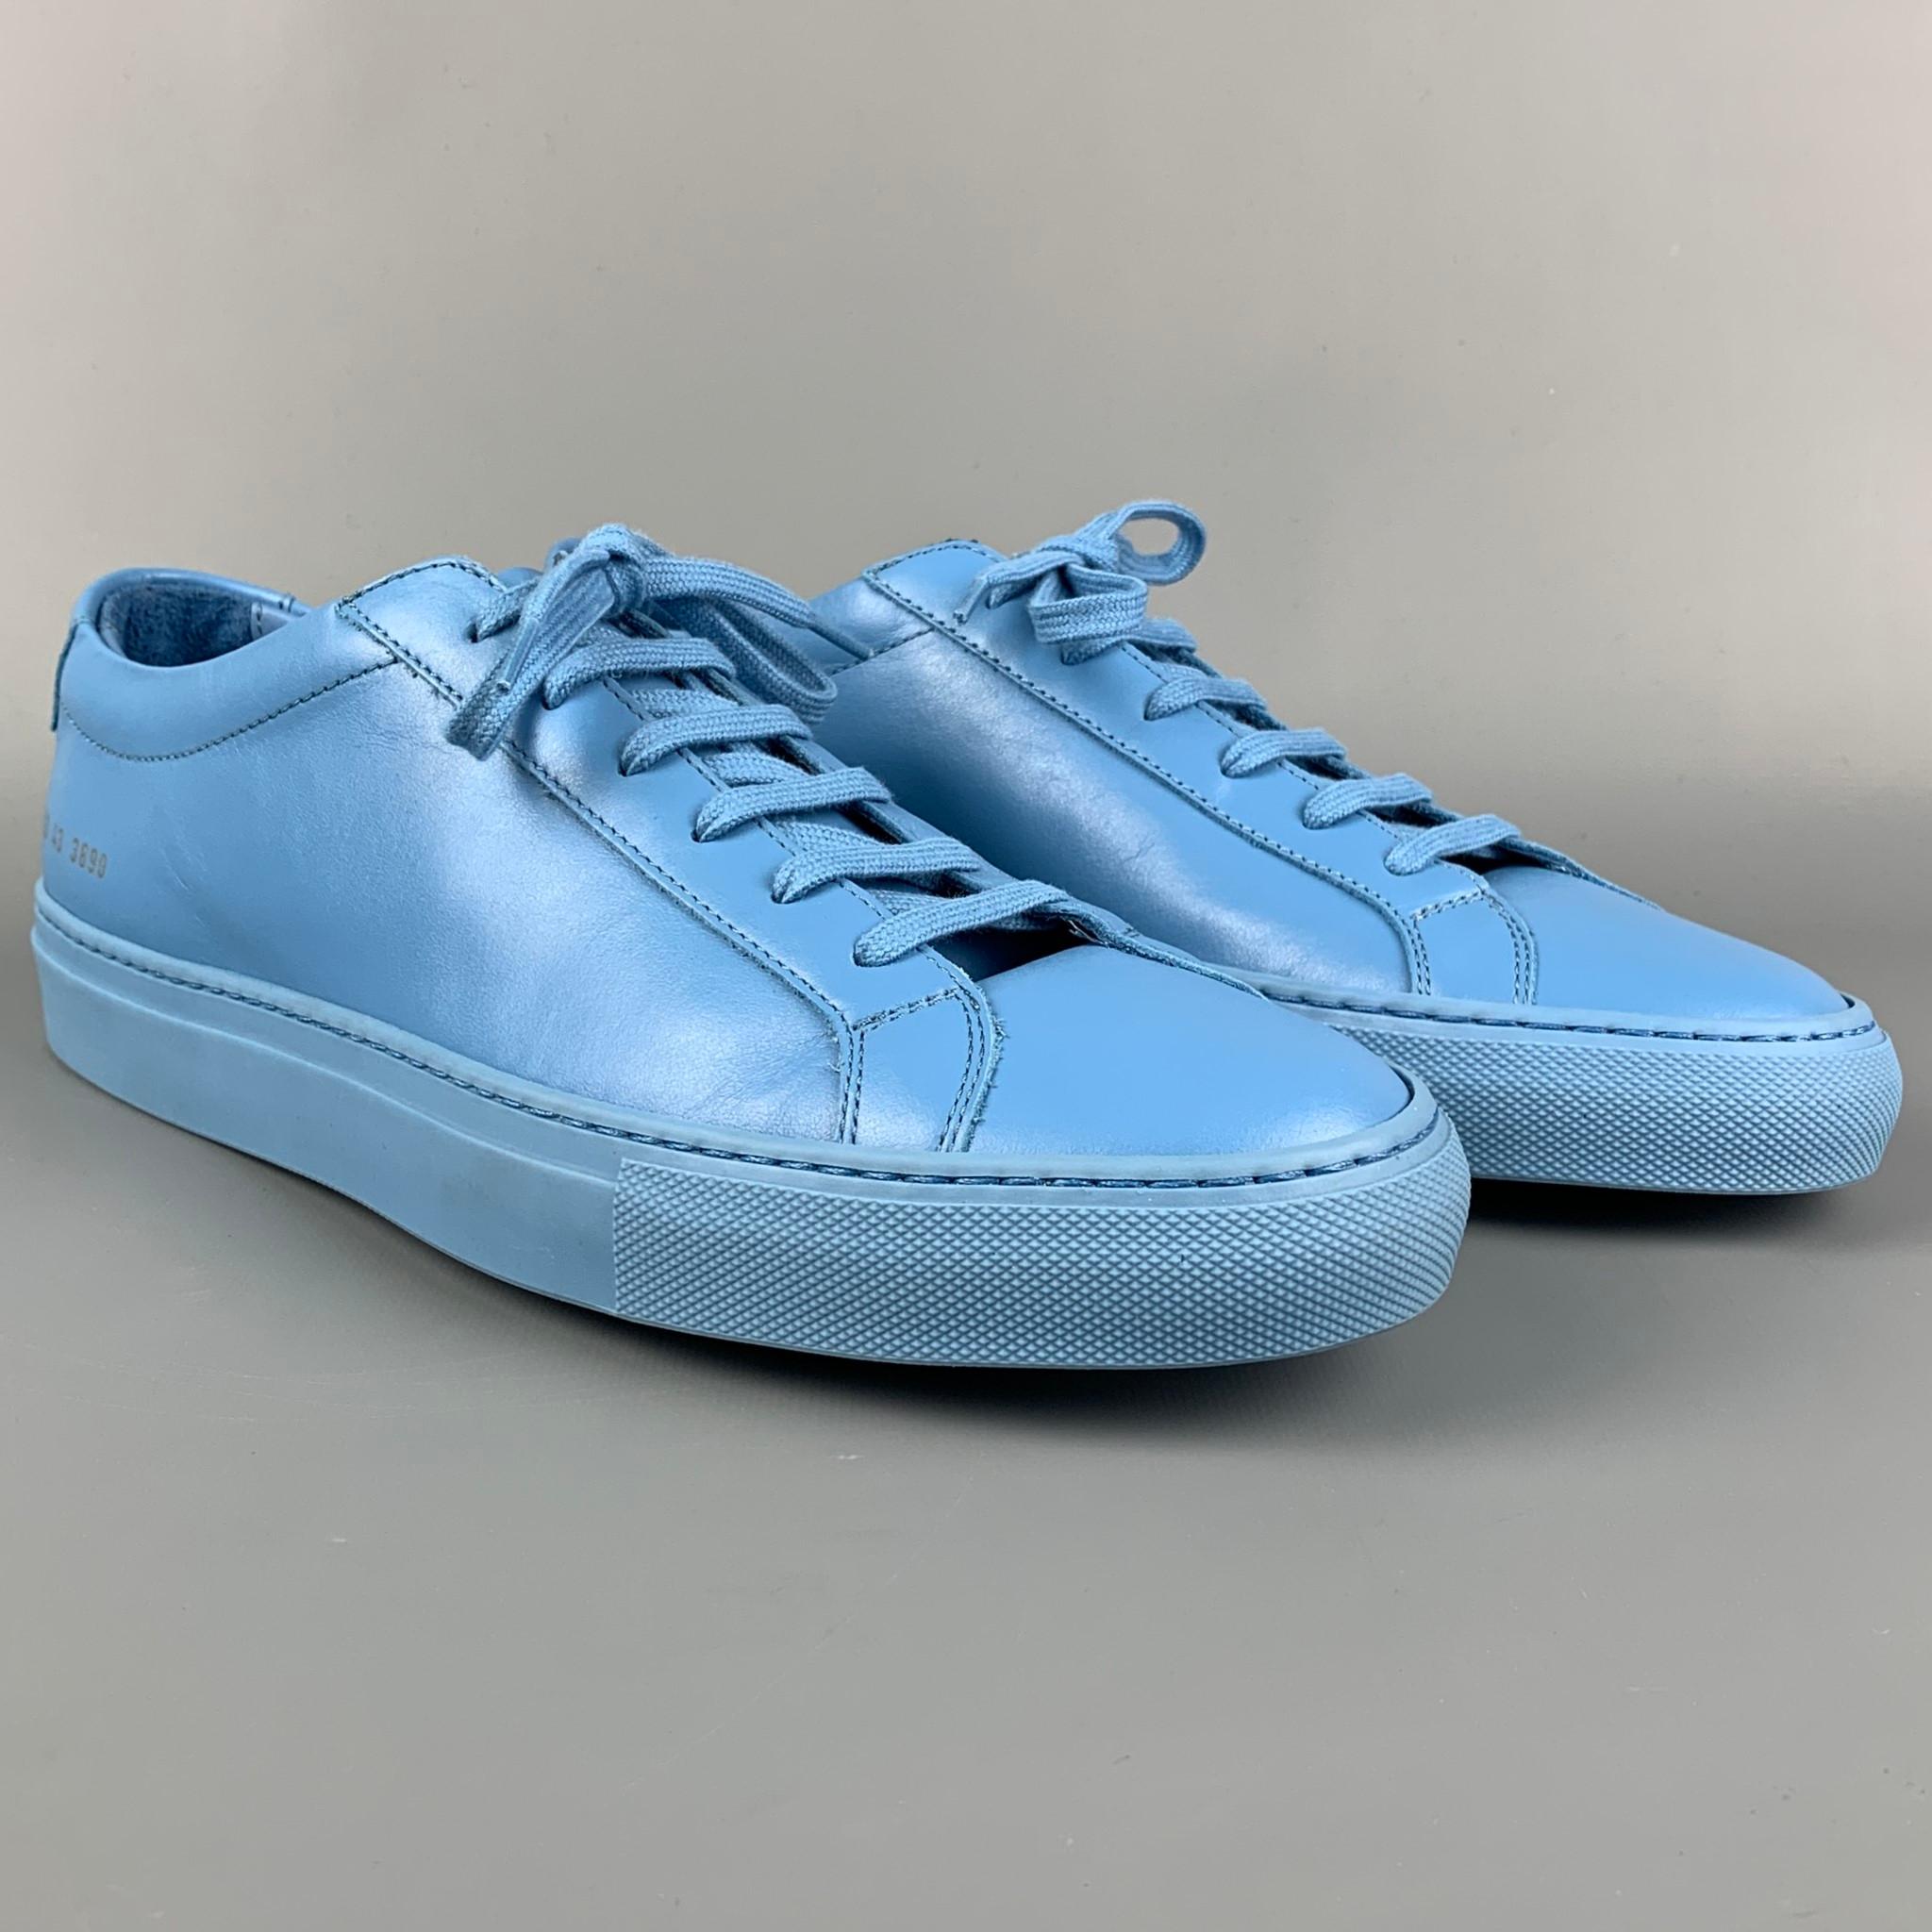 COMMON PROJECTS sneakers comes in a light blue leather featuring a rubber sole and a lace up closure. Made in Italy. 

New With Box. 
Marked: 1528 43 3890
Original Retail Price: $411.00

Outsole: 12 in. x 4.25 in. 